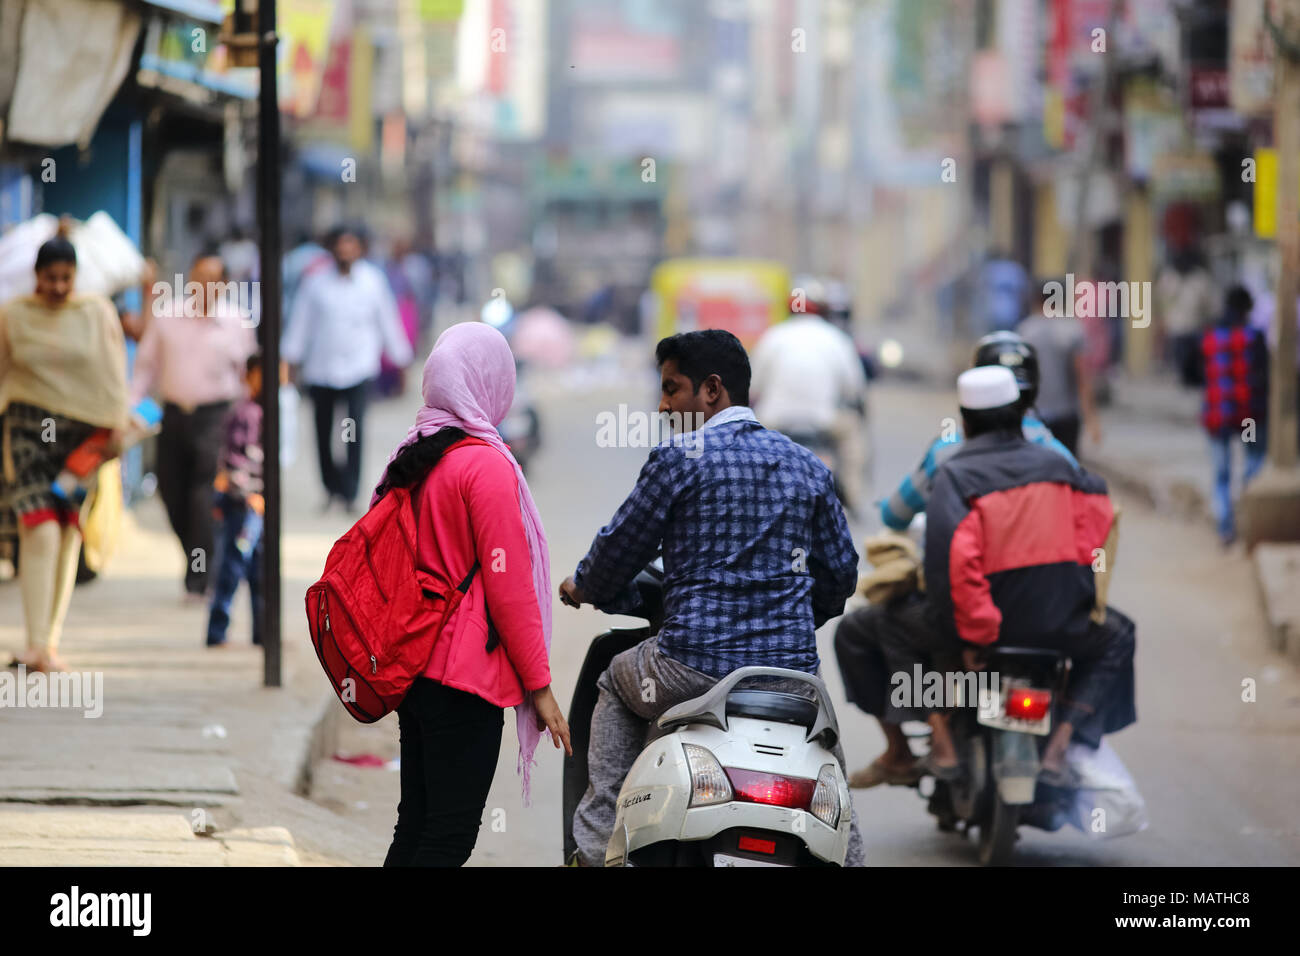 Bangalore, India - October 23, 2016: Unknown lady in casual wear get dropped in a two-wheeler by a man this morning in Avenue road. Stock Photo